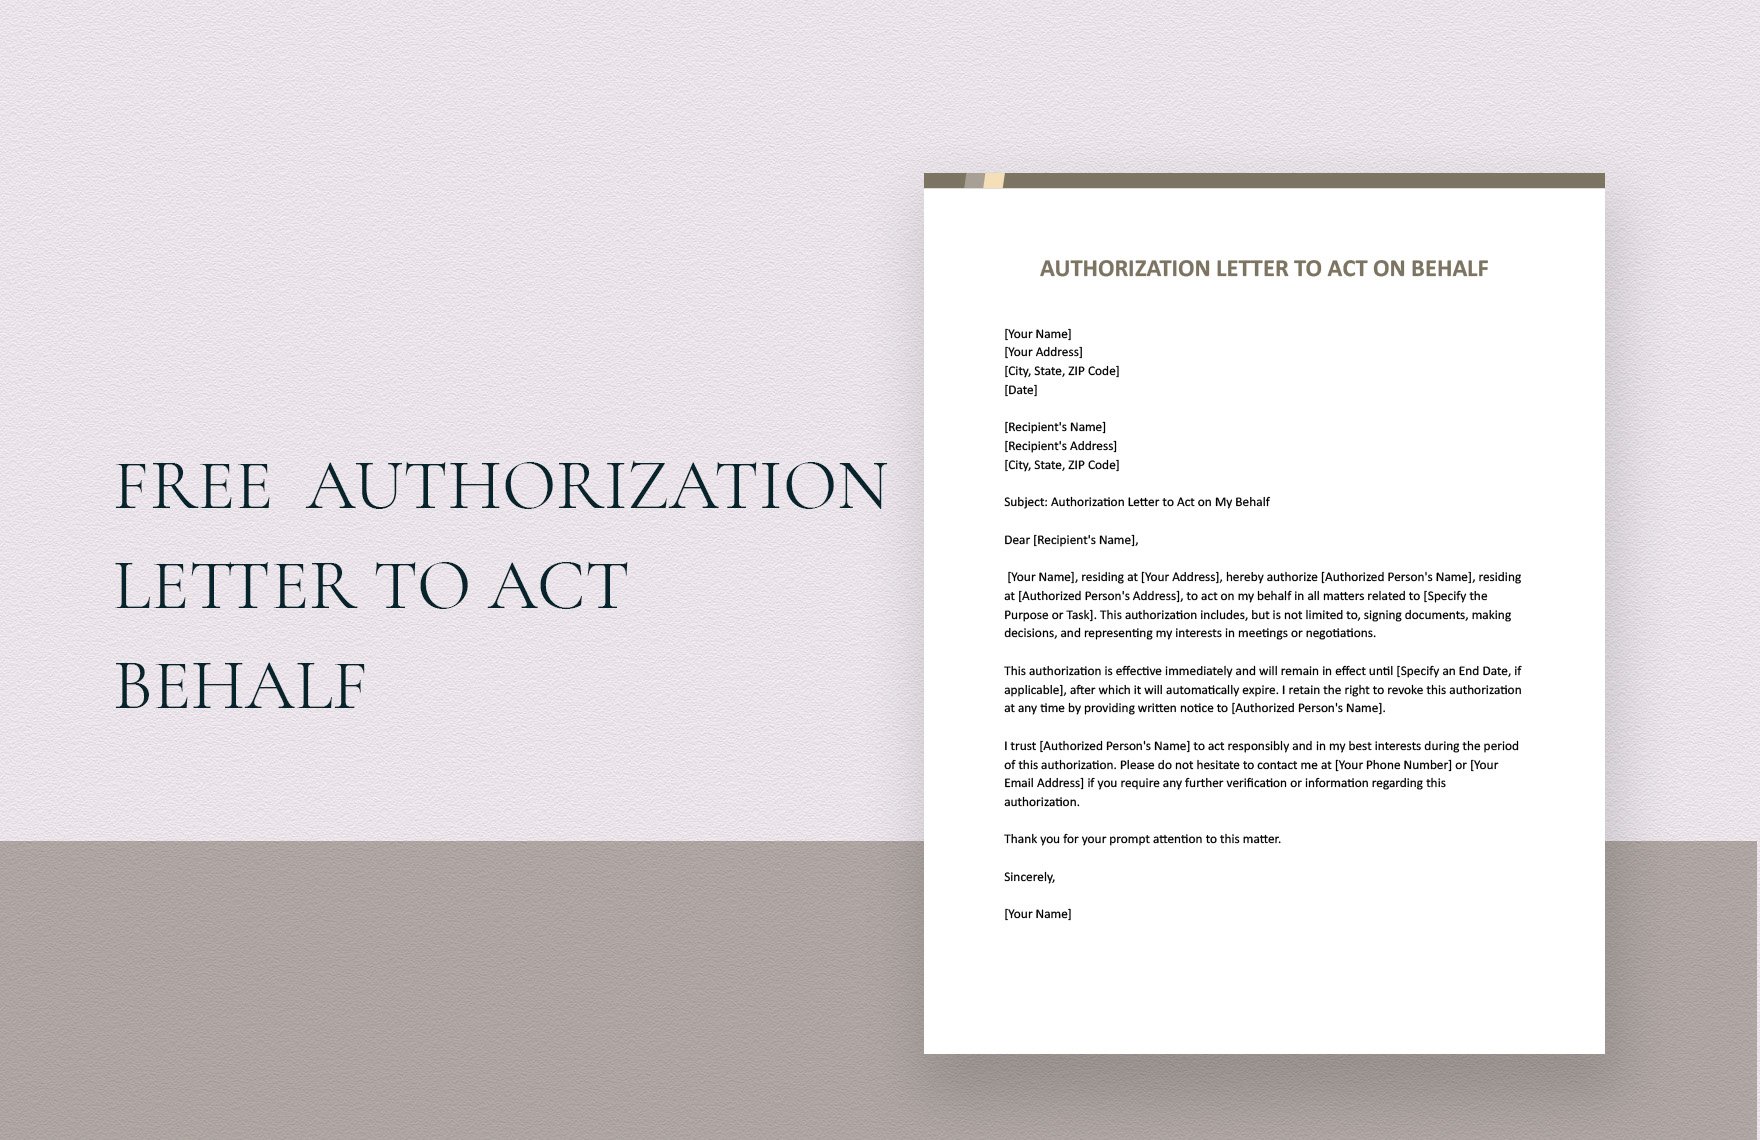 Authorization Letter to Act on Behalf